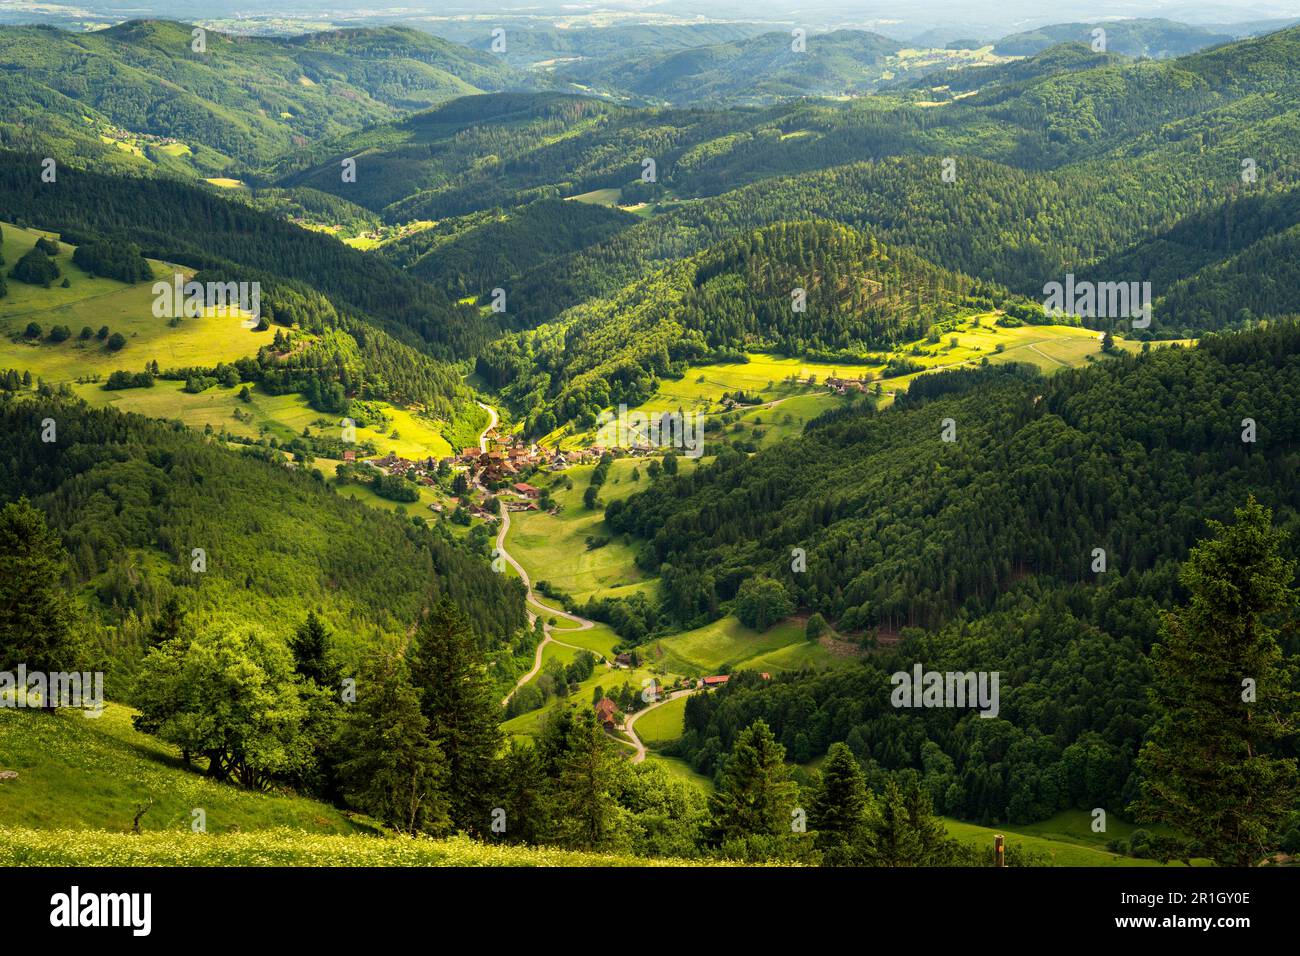 Landscape in the Black Forest. The village Neuenweg, surrounded by mountains, meadows and forest. View from mount Belchen. Kleines Wiesental, Germany. Stock Photo